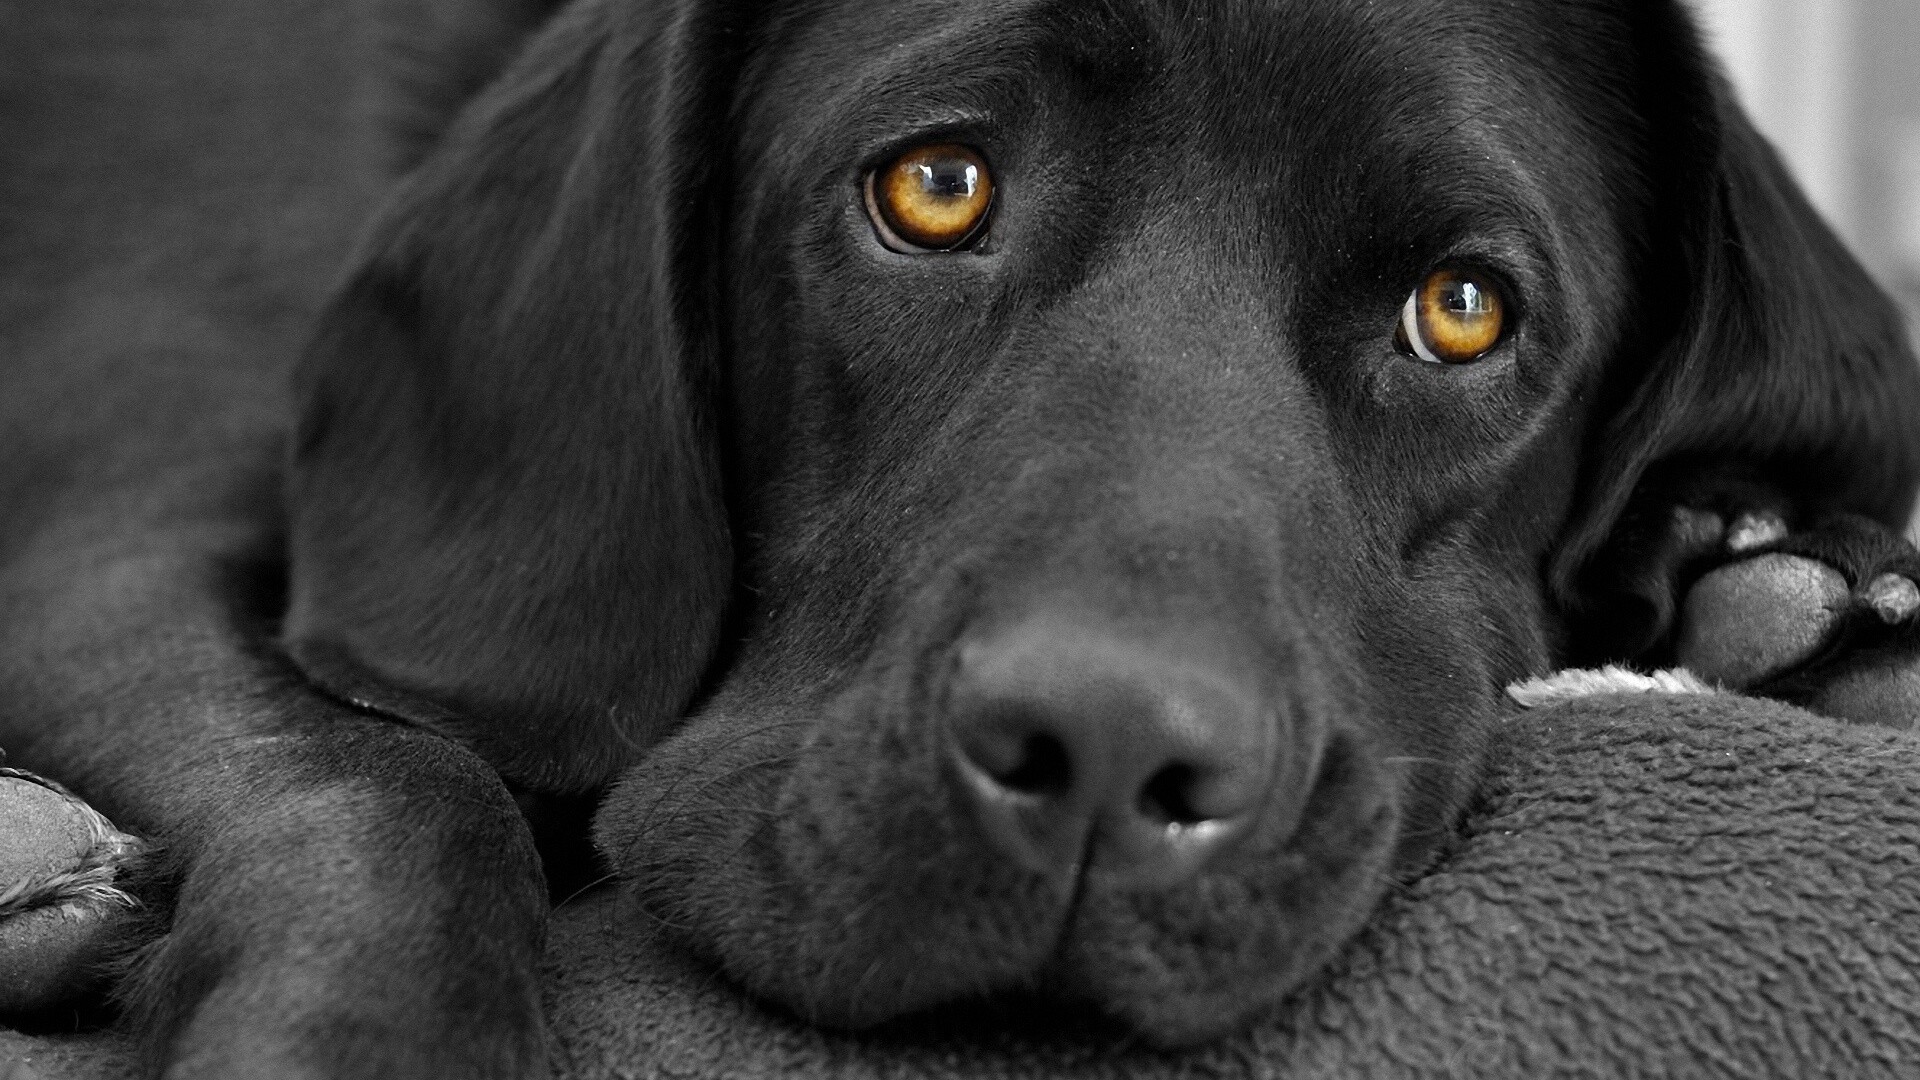 Labrador Retriever: The breed descended from St. John's water dogs. 1920x1080 Full HD Wallpaper.